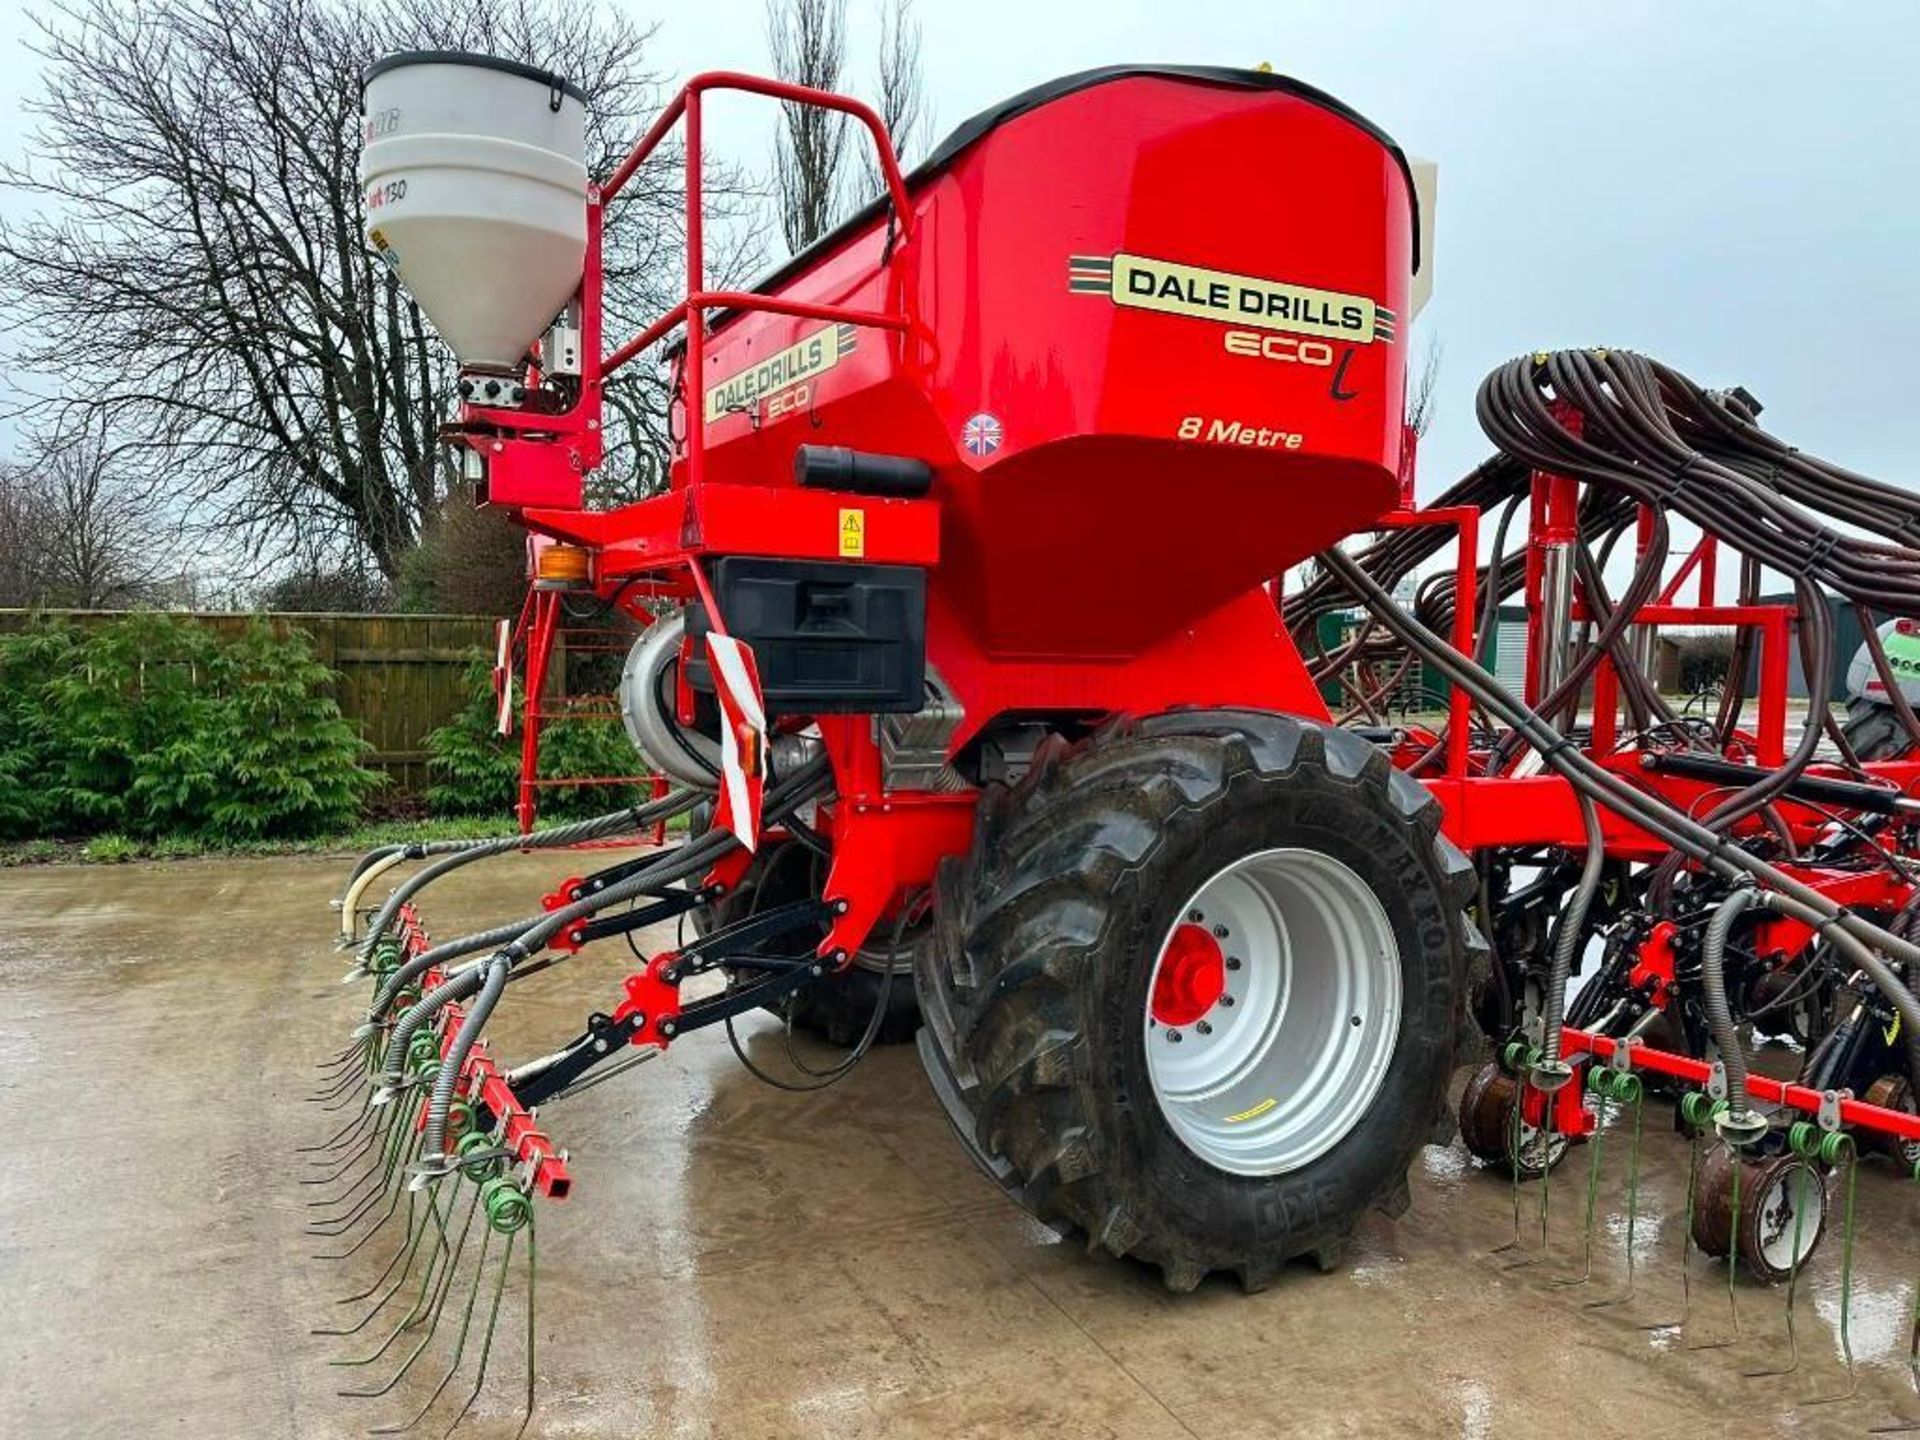 2020 Dale Drills Eco L 8m drill, 3T hopper, chassis mounted following harrow, lower link arm drawbar - Image 10 of 12